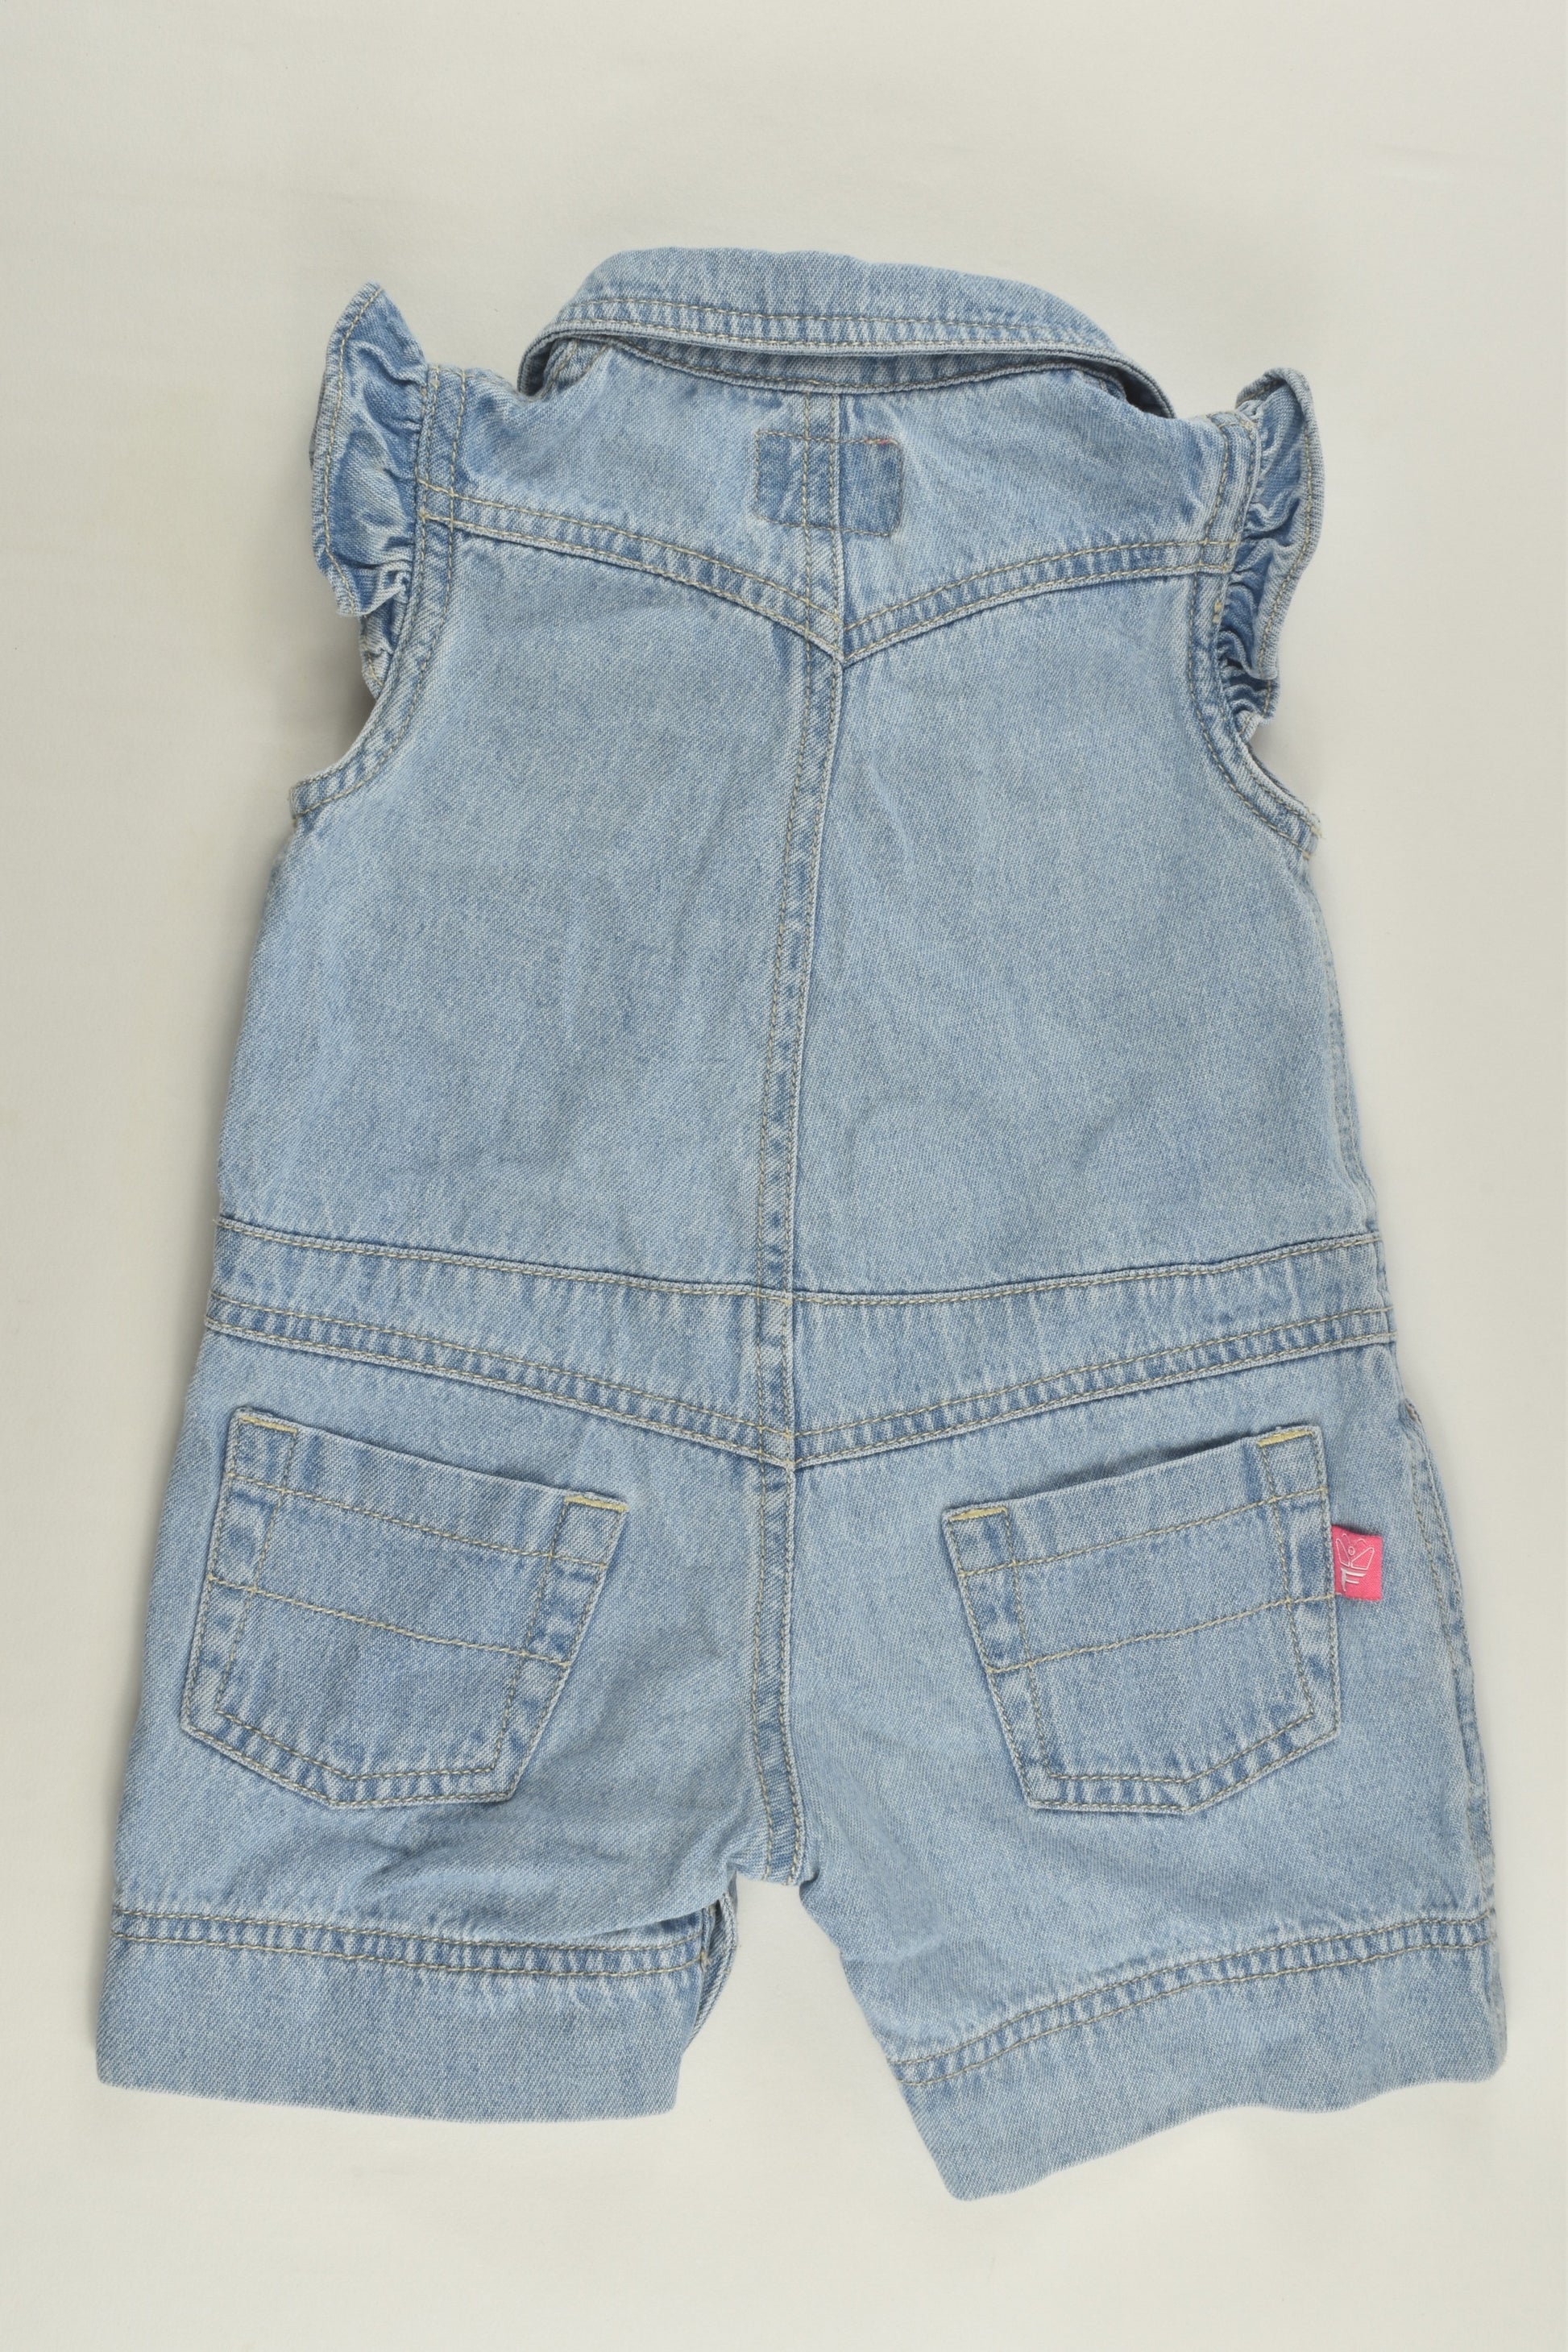 Fred Bare Size 00 Denim Playsuit